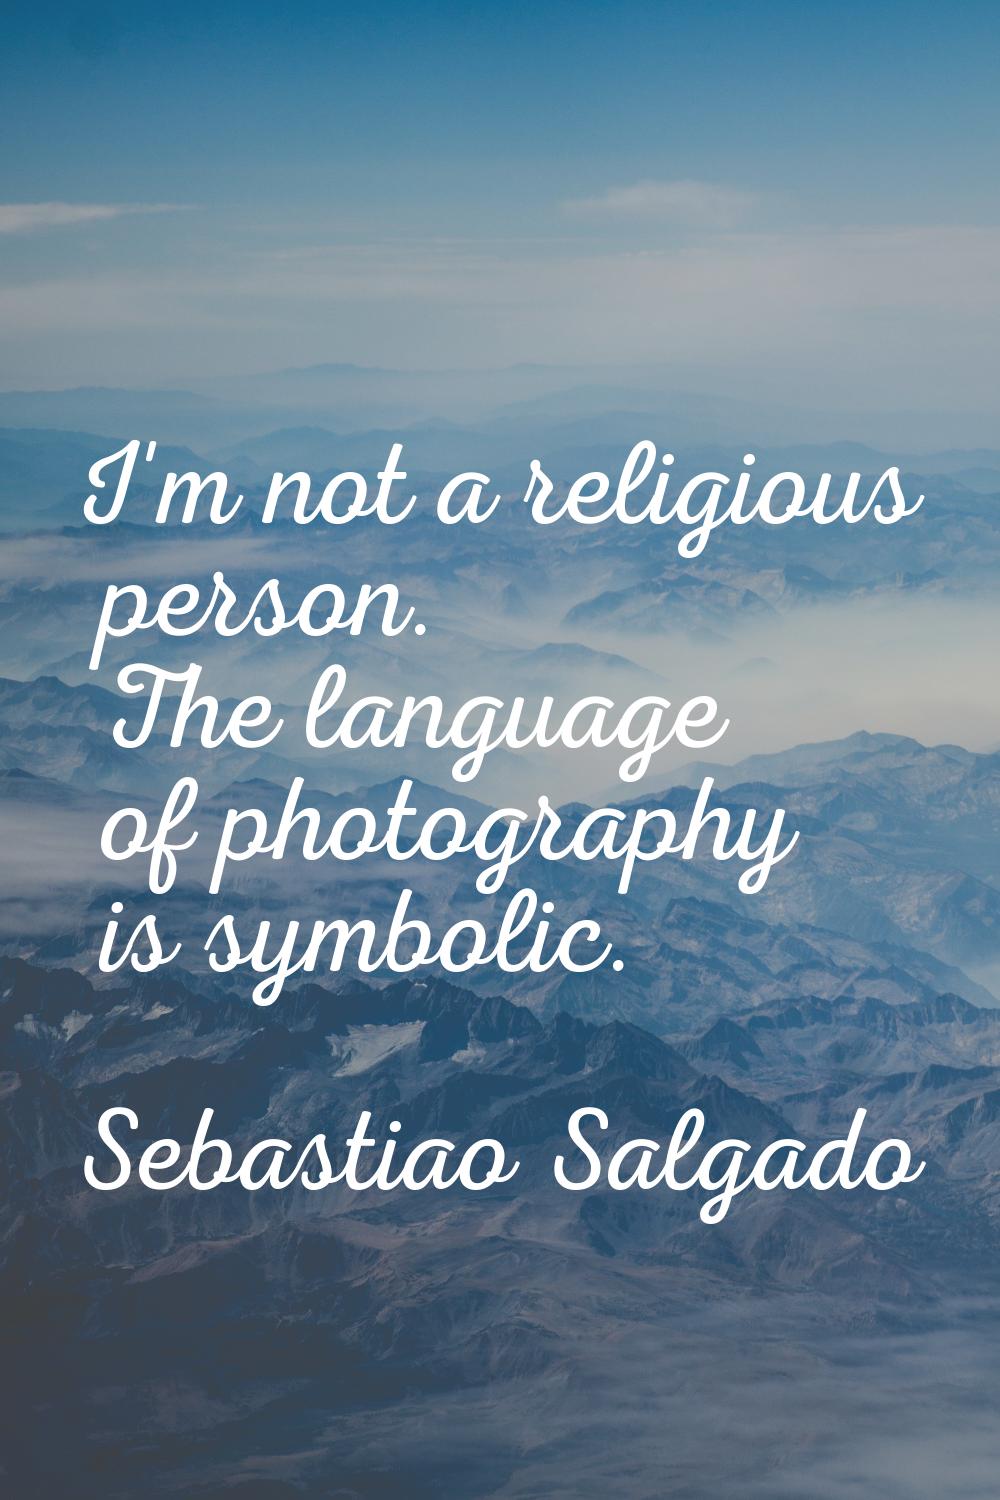 I'm not a religious person. The language of photography is symbolic.